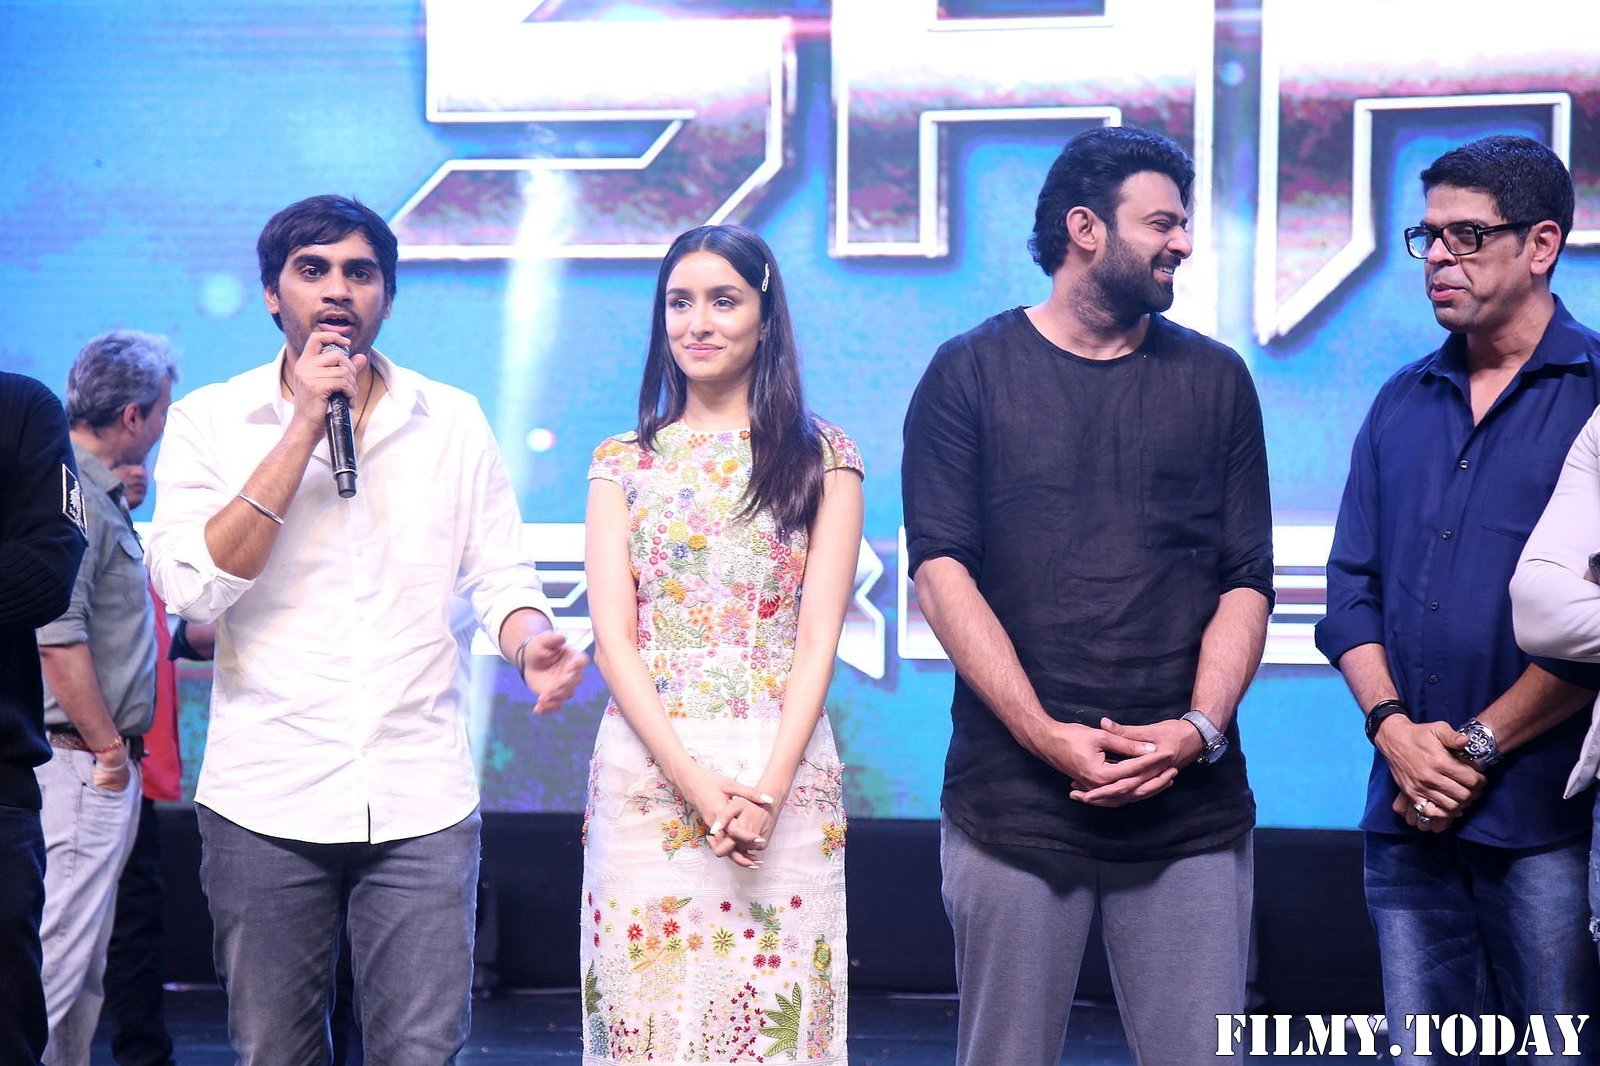 Saaho Movie Grand Pre Release Event Photos | Picture 1676378